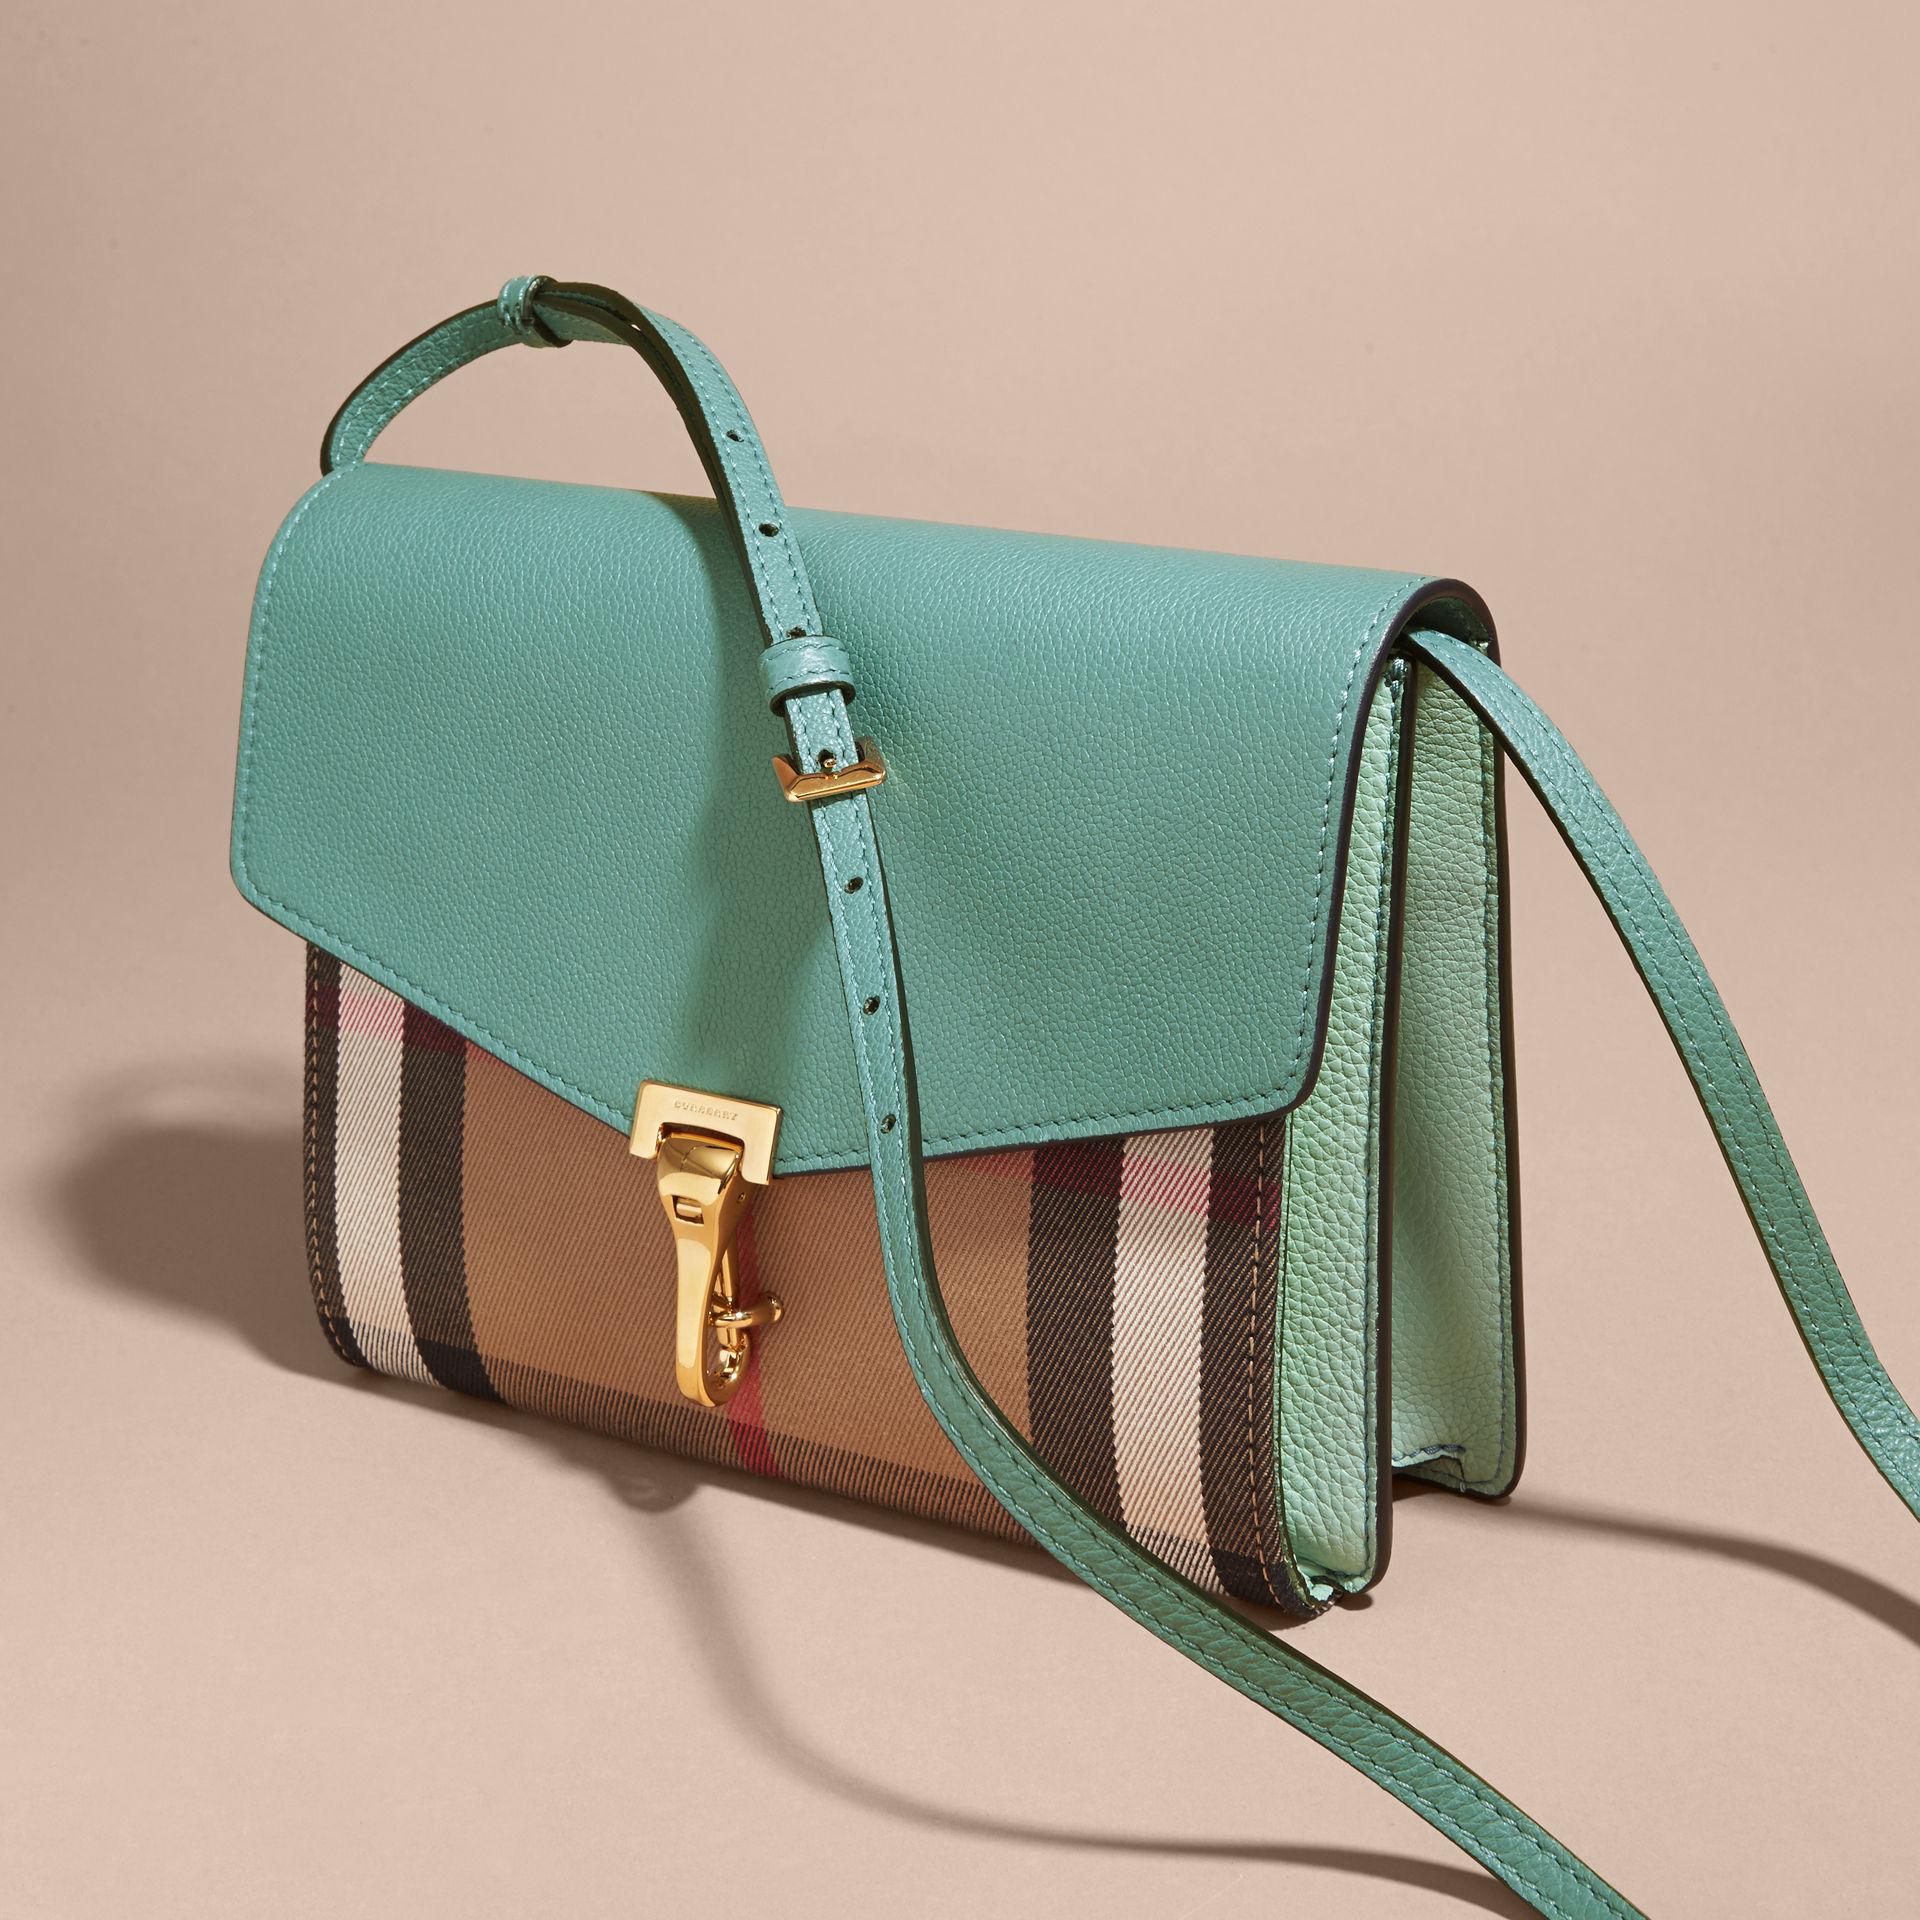 Lyst - Burberry Small Leather And House Check Crossbody Bag Celadon Blue in Blue